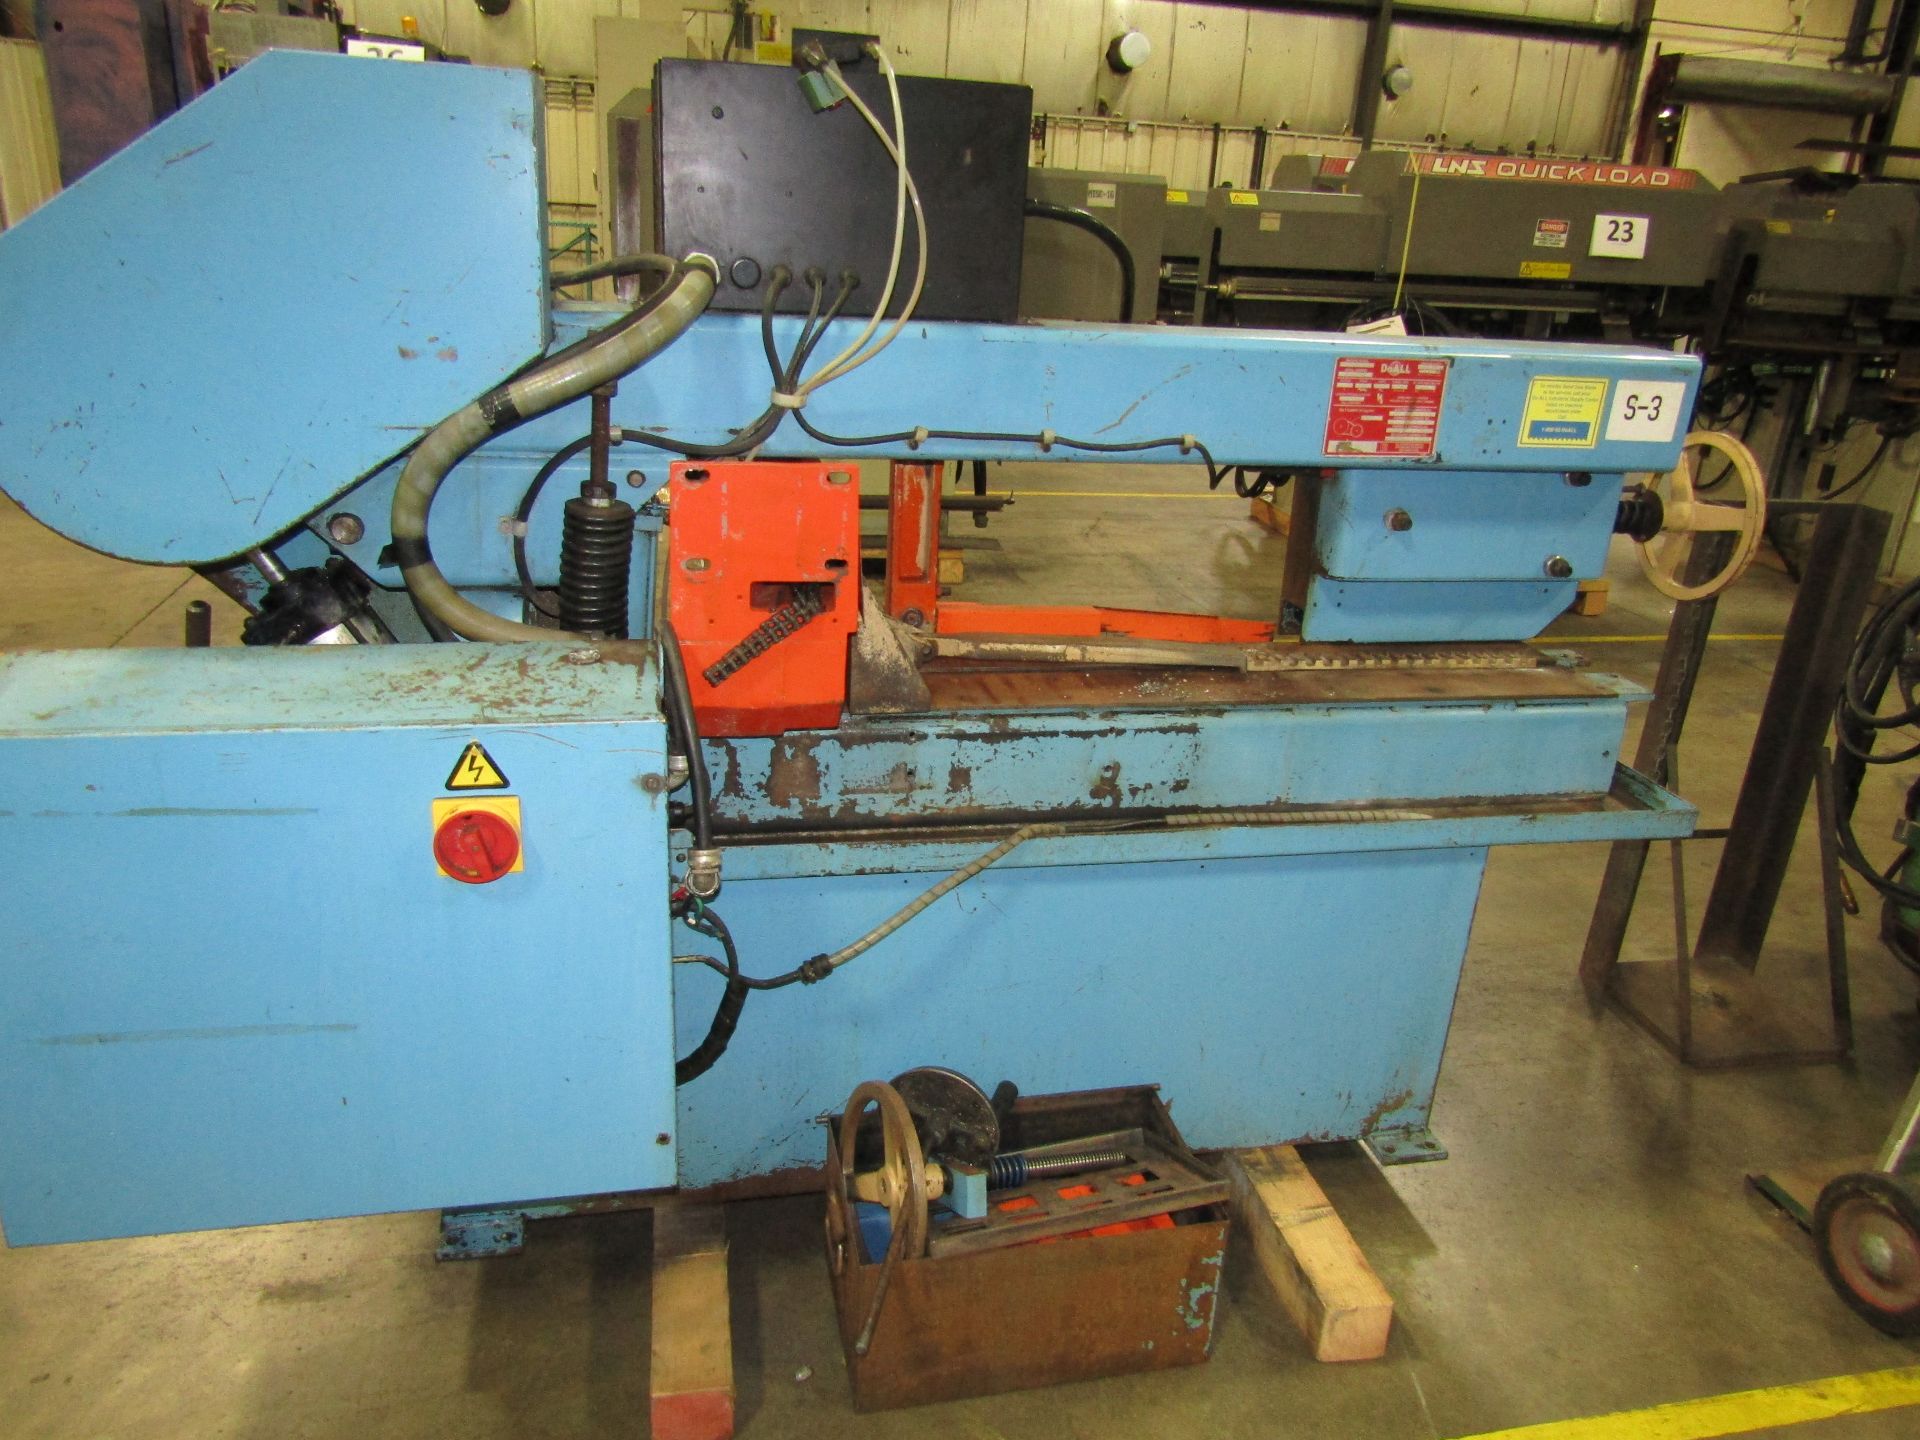 Doall Horizontal Bandsaw M#: C-916A, S#: 528-00582 - Image 4 of 4